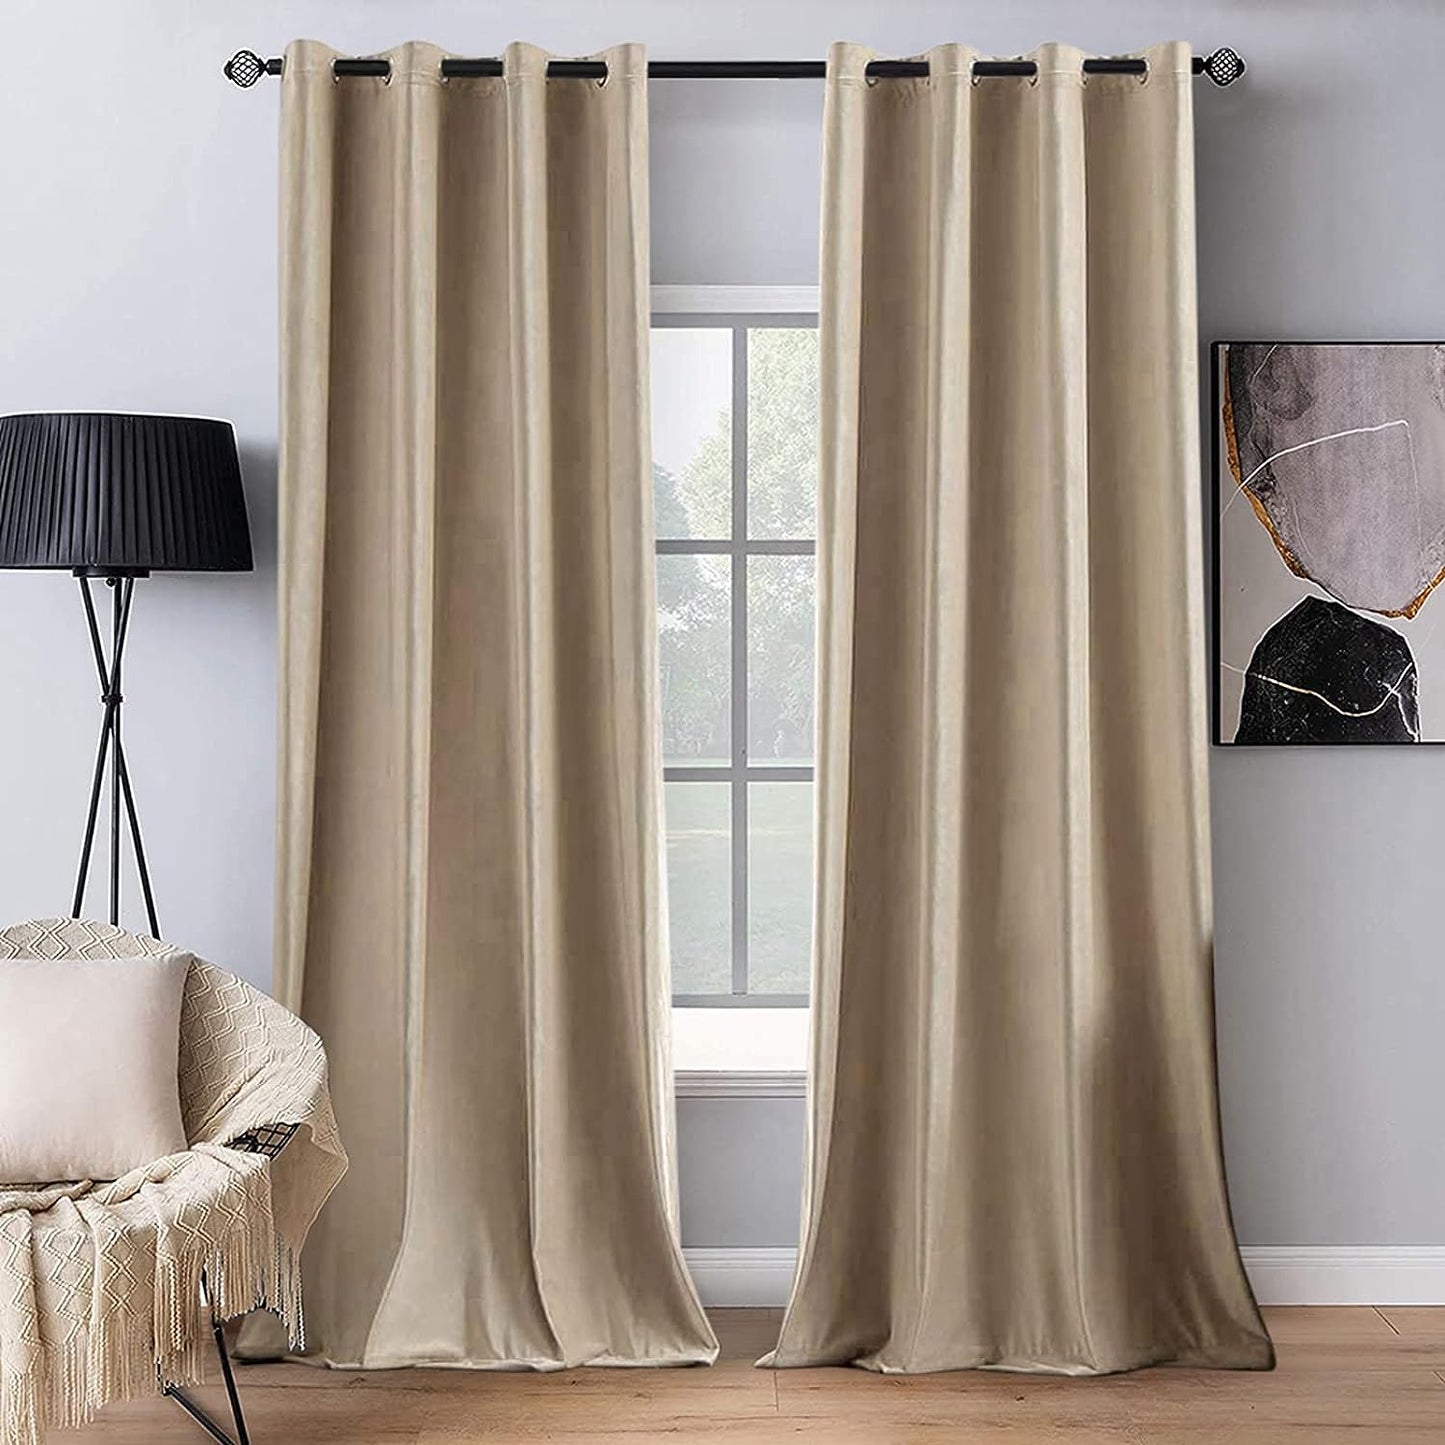 MIULEE Velvet Curtains Olive Green Elegant Grommet Curtains Thermal Insulated Soundproof Room Darkening Curtains/Drapes for Classical Living Room Bedroom Decor 52 X 84 Inch Set of 2  MIULEE Camel Beige W52 X L96 